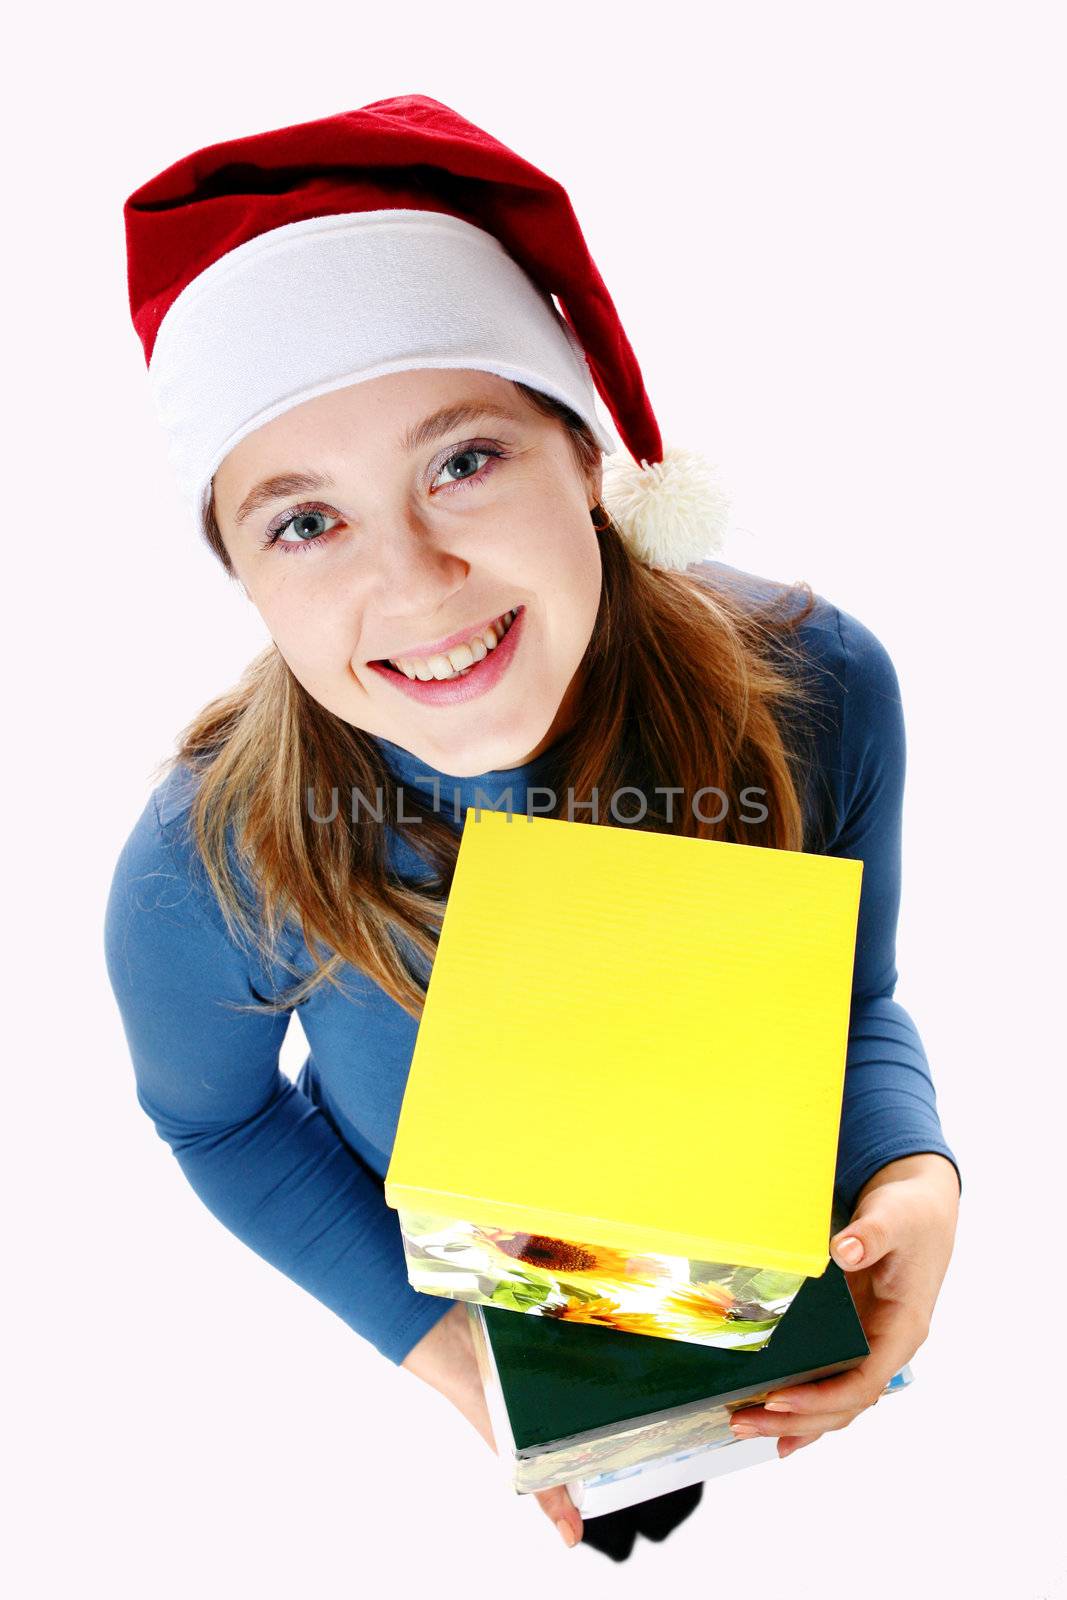 An image of a nice girl with boxes